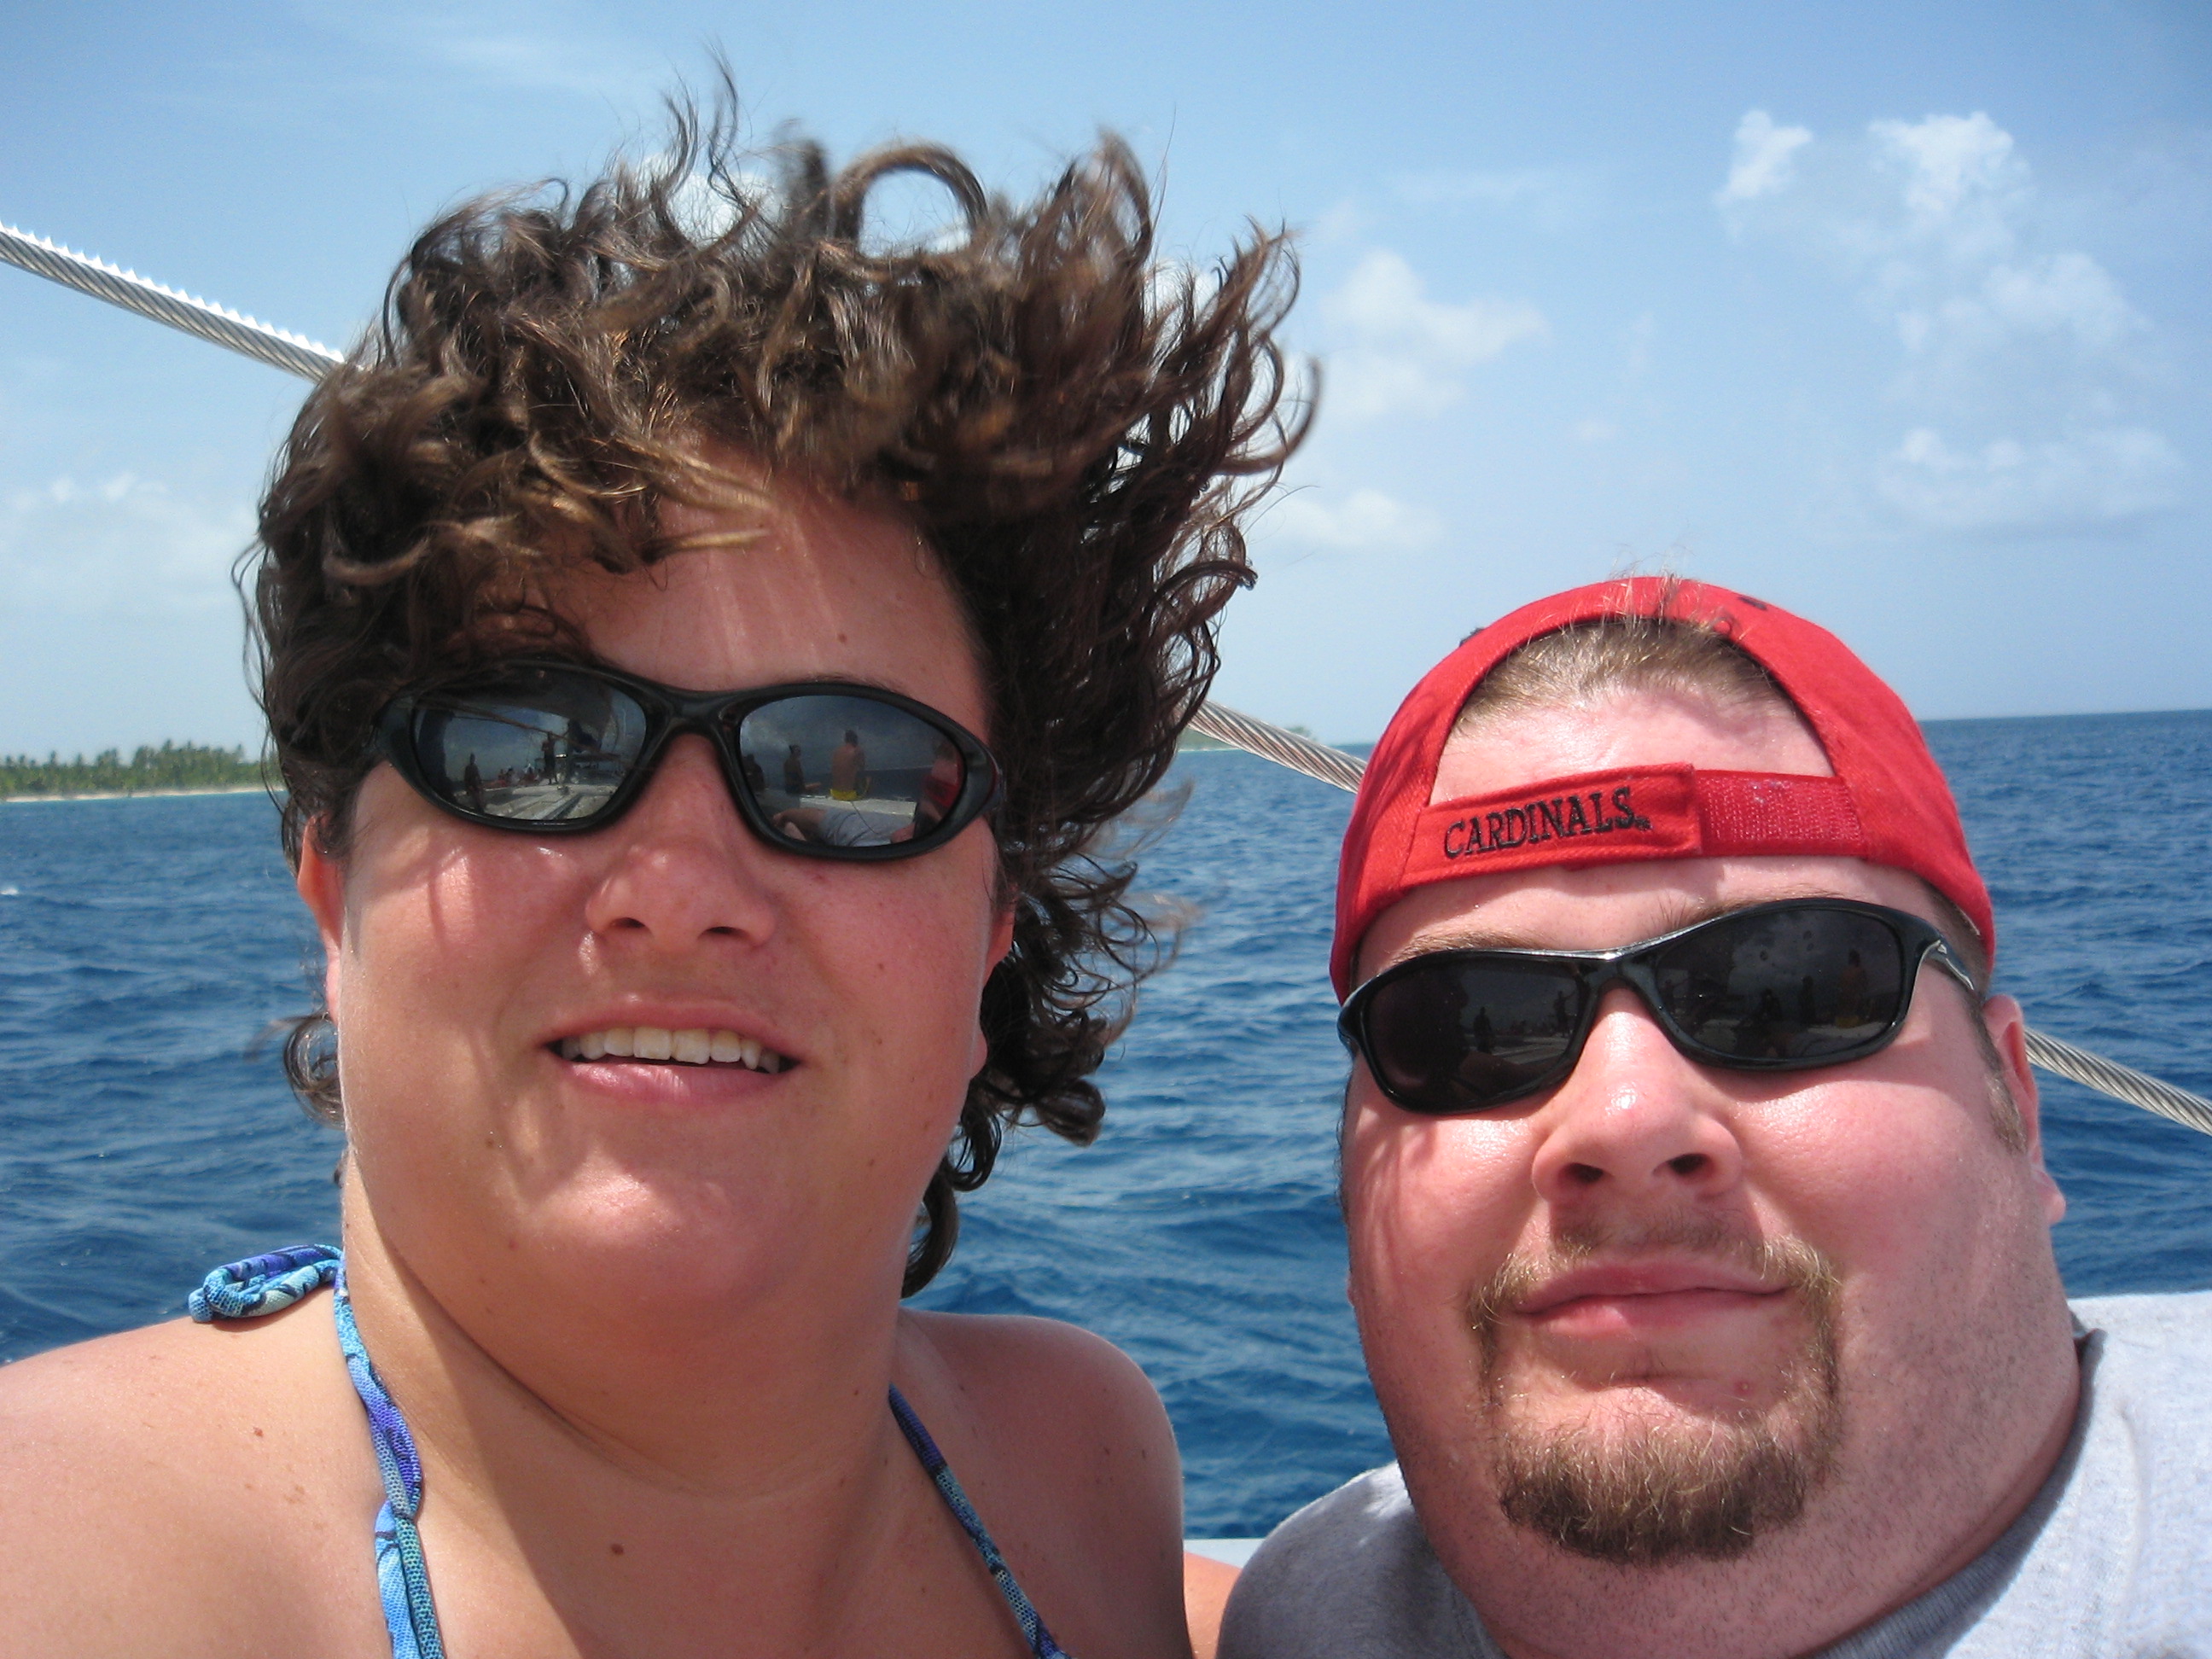 BJ and Katie on the Catamaran